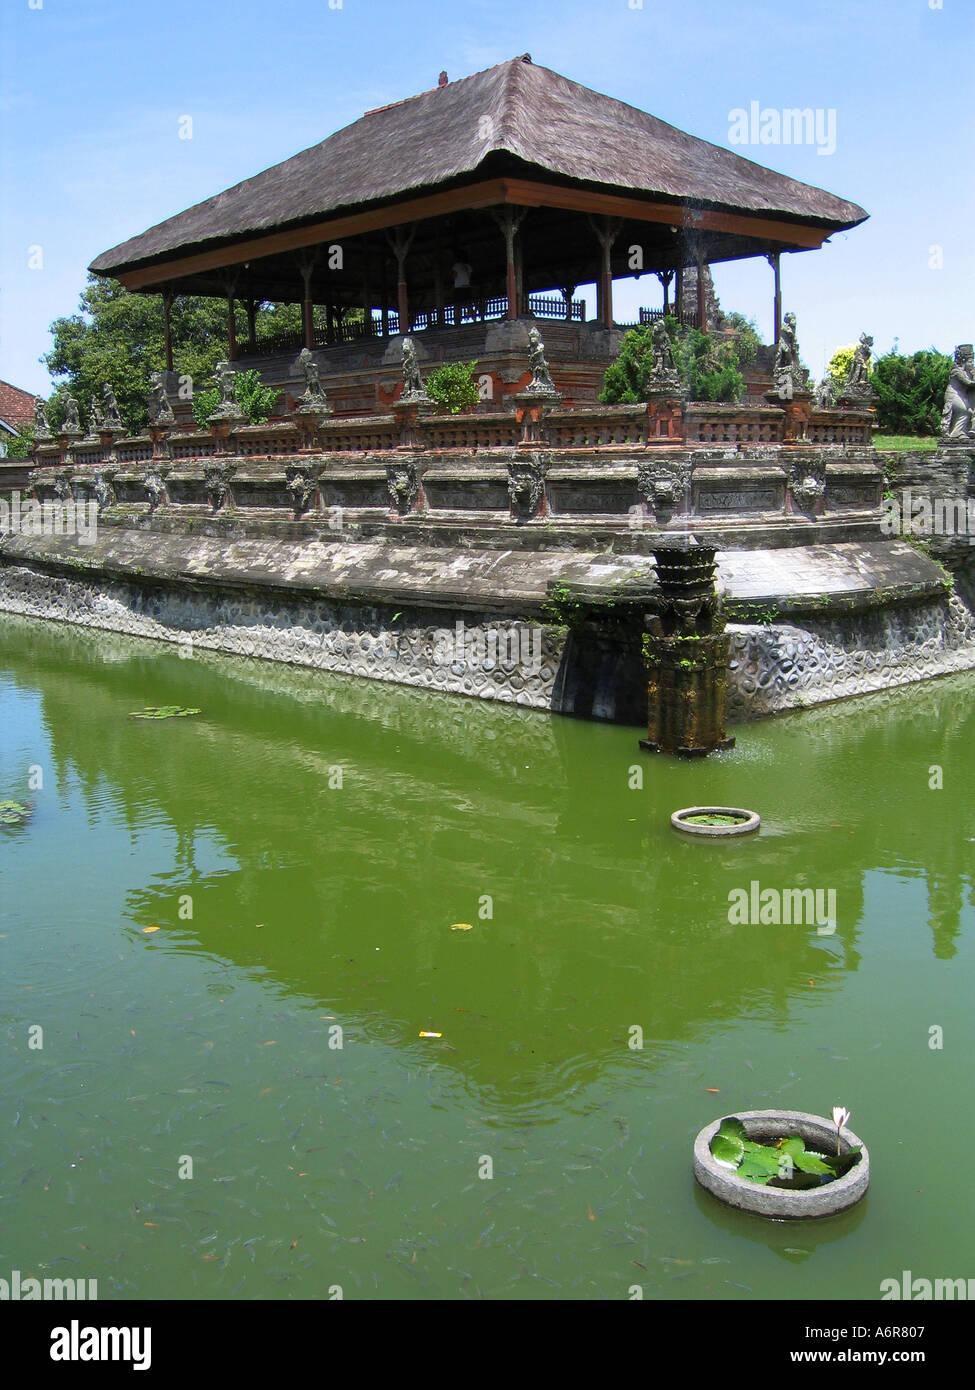 Bale Kambang floating pavilion surrounded by artificial pond in Semarapura Klungkung Bali Indonesia Asia Stock Photo